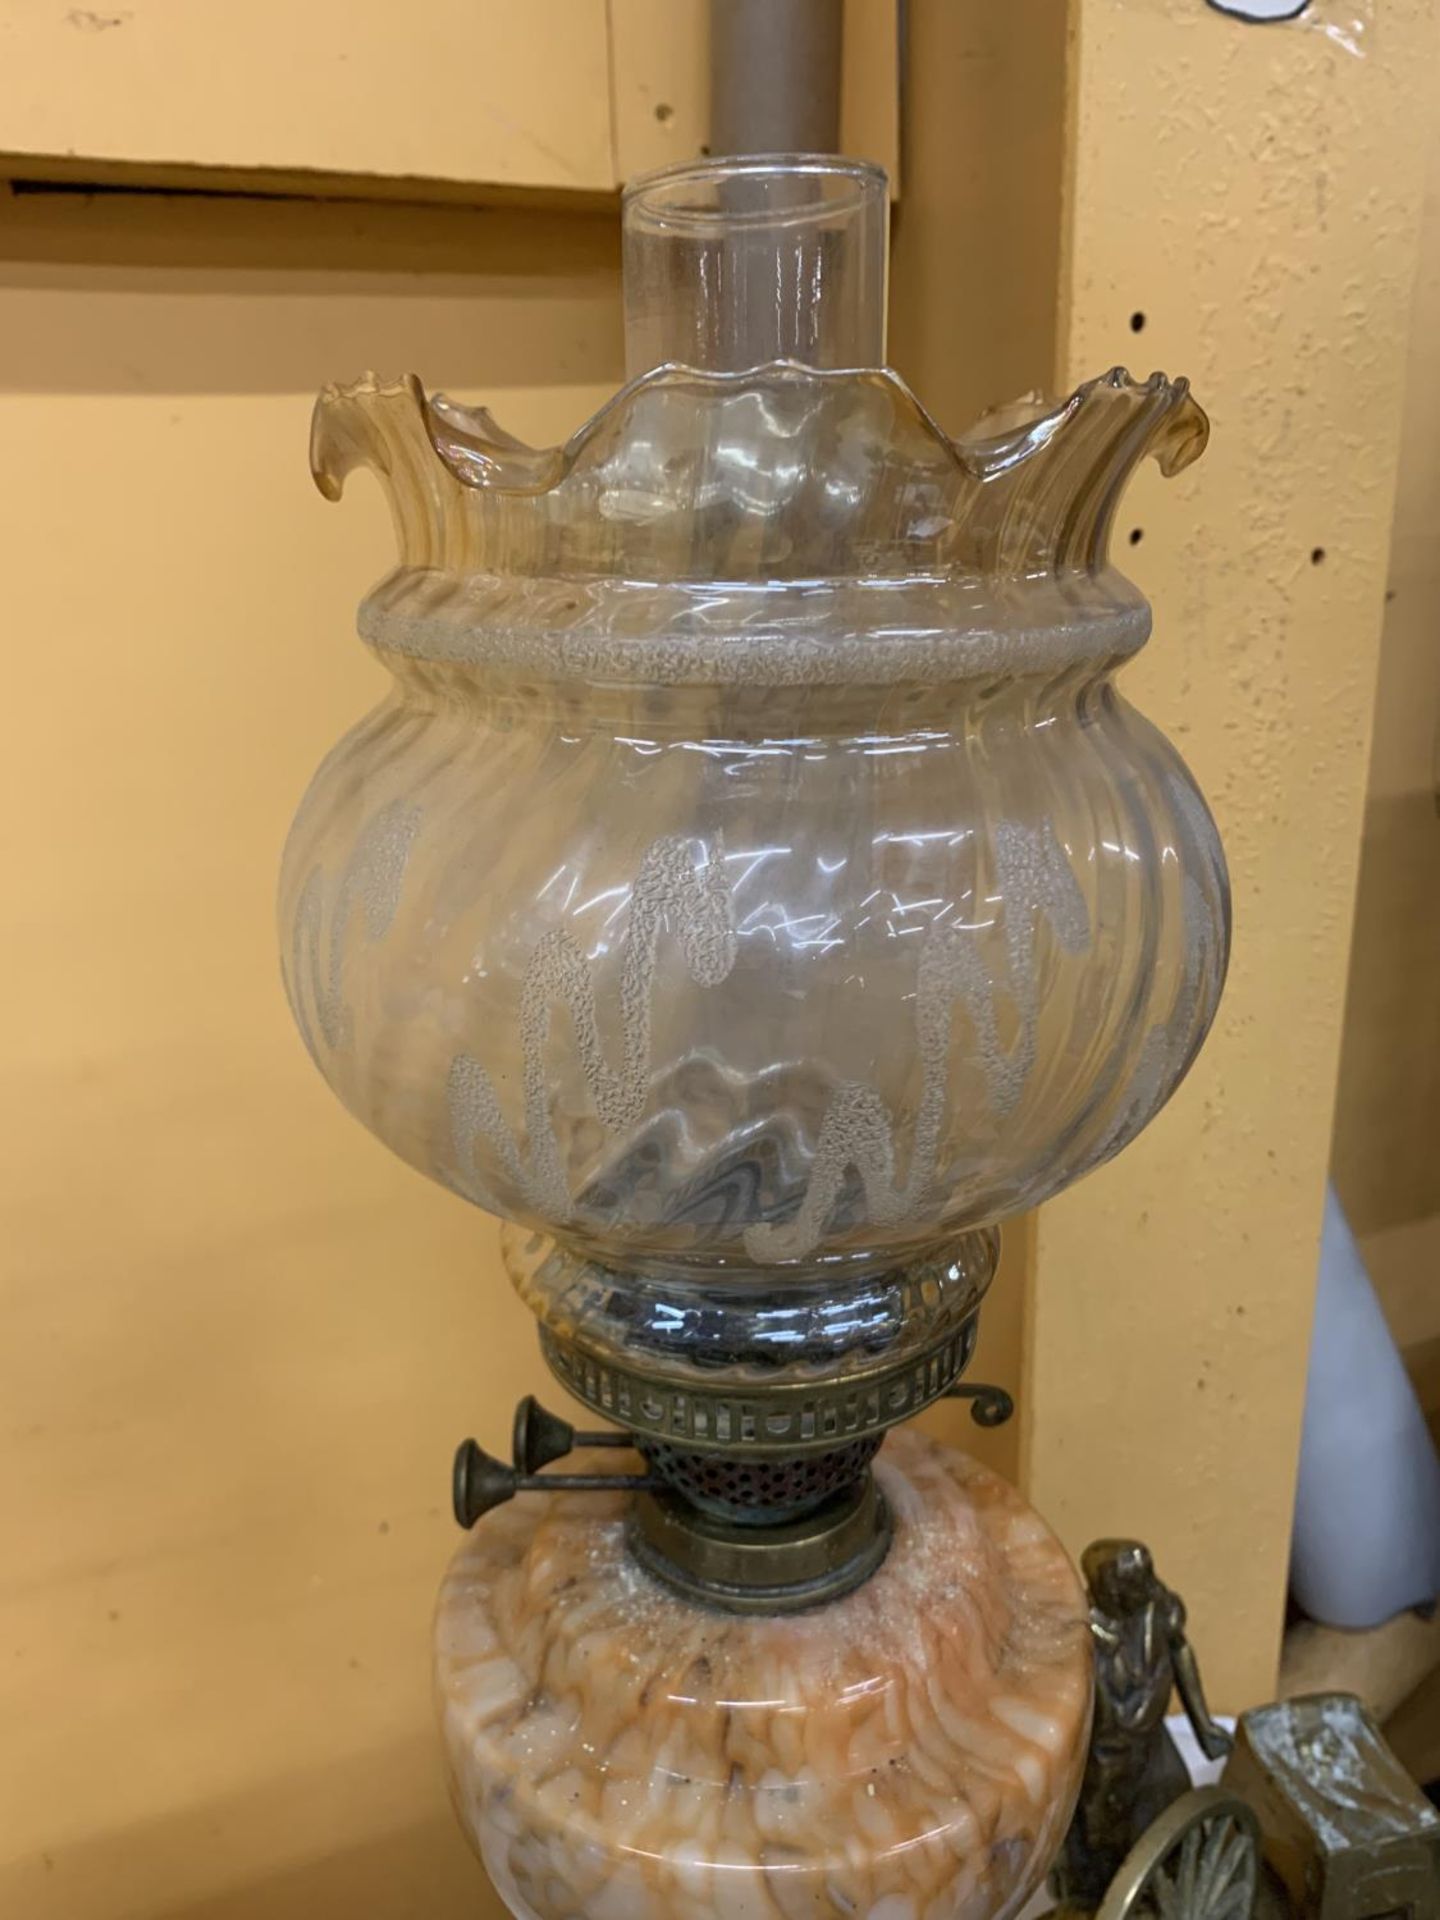 A VICTORIAN OIL LAMP WITH A BRASS STEM, MARBLE MIDDLE, FLUTED AND ETCHED SHADE AND CHIMNEY HEIGHT - Image 2 of 3